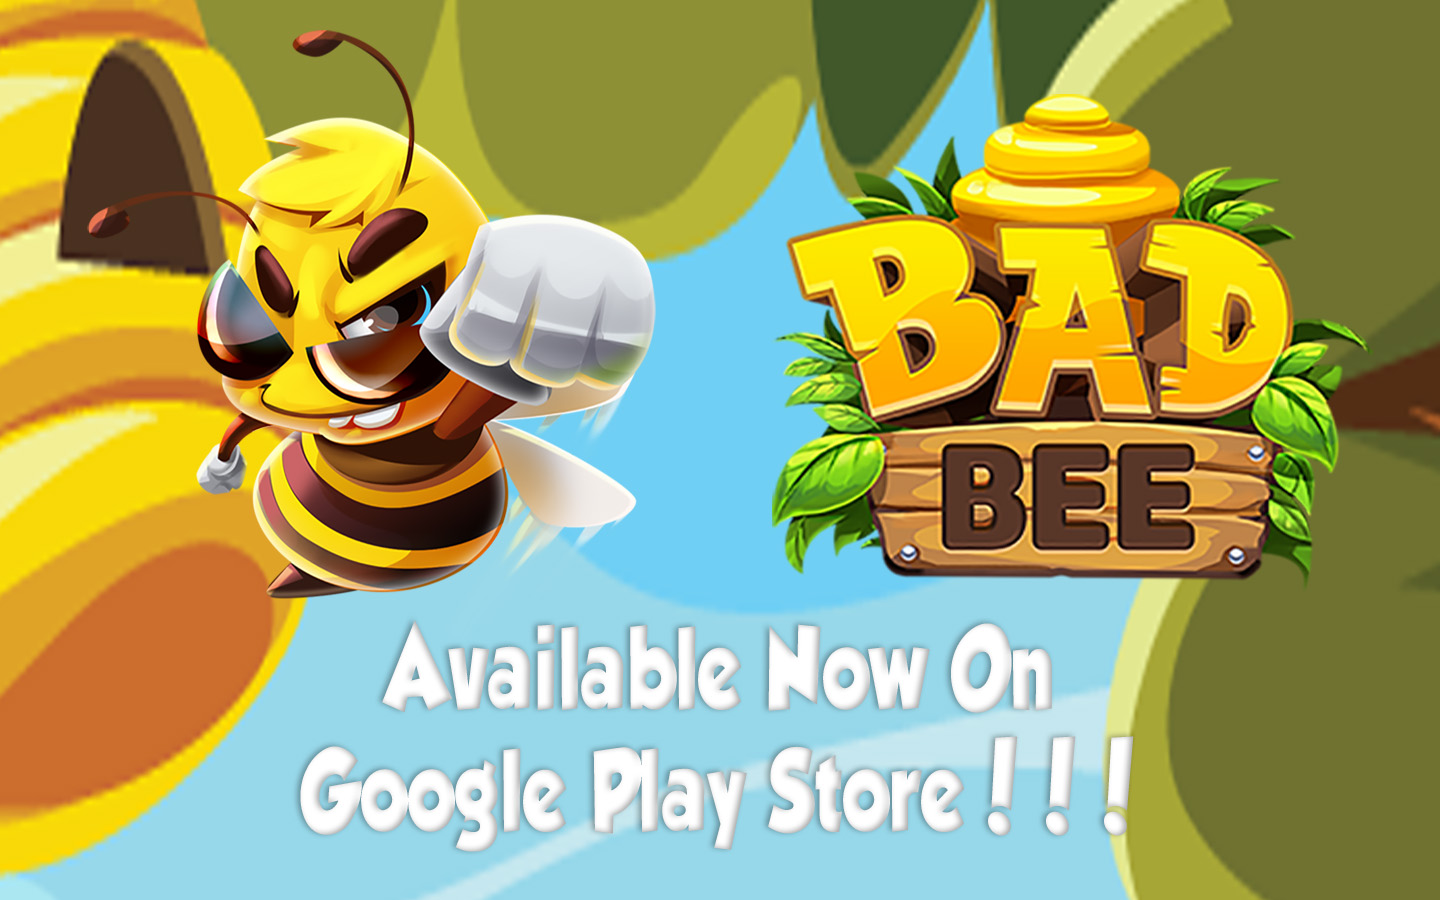 Download Badbee at Google Play Store Early Access